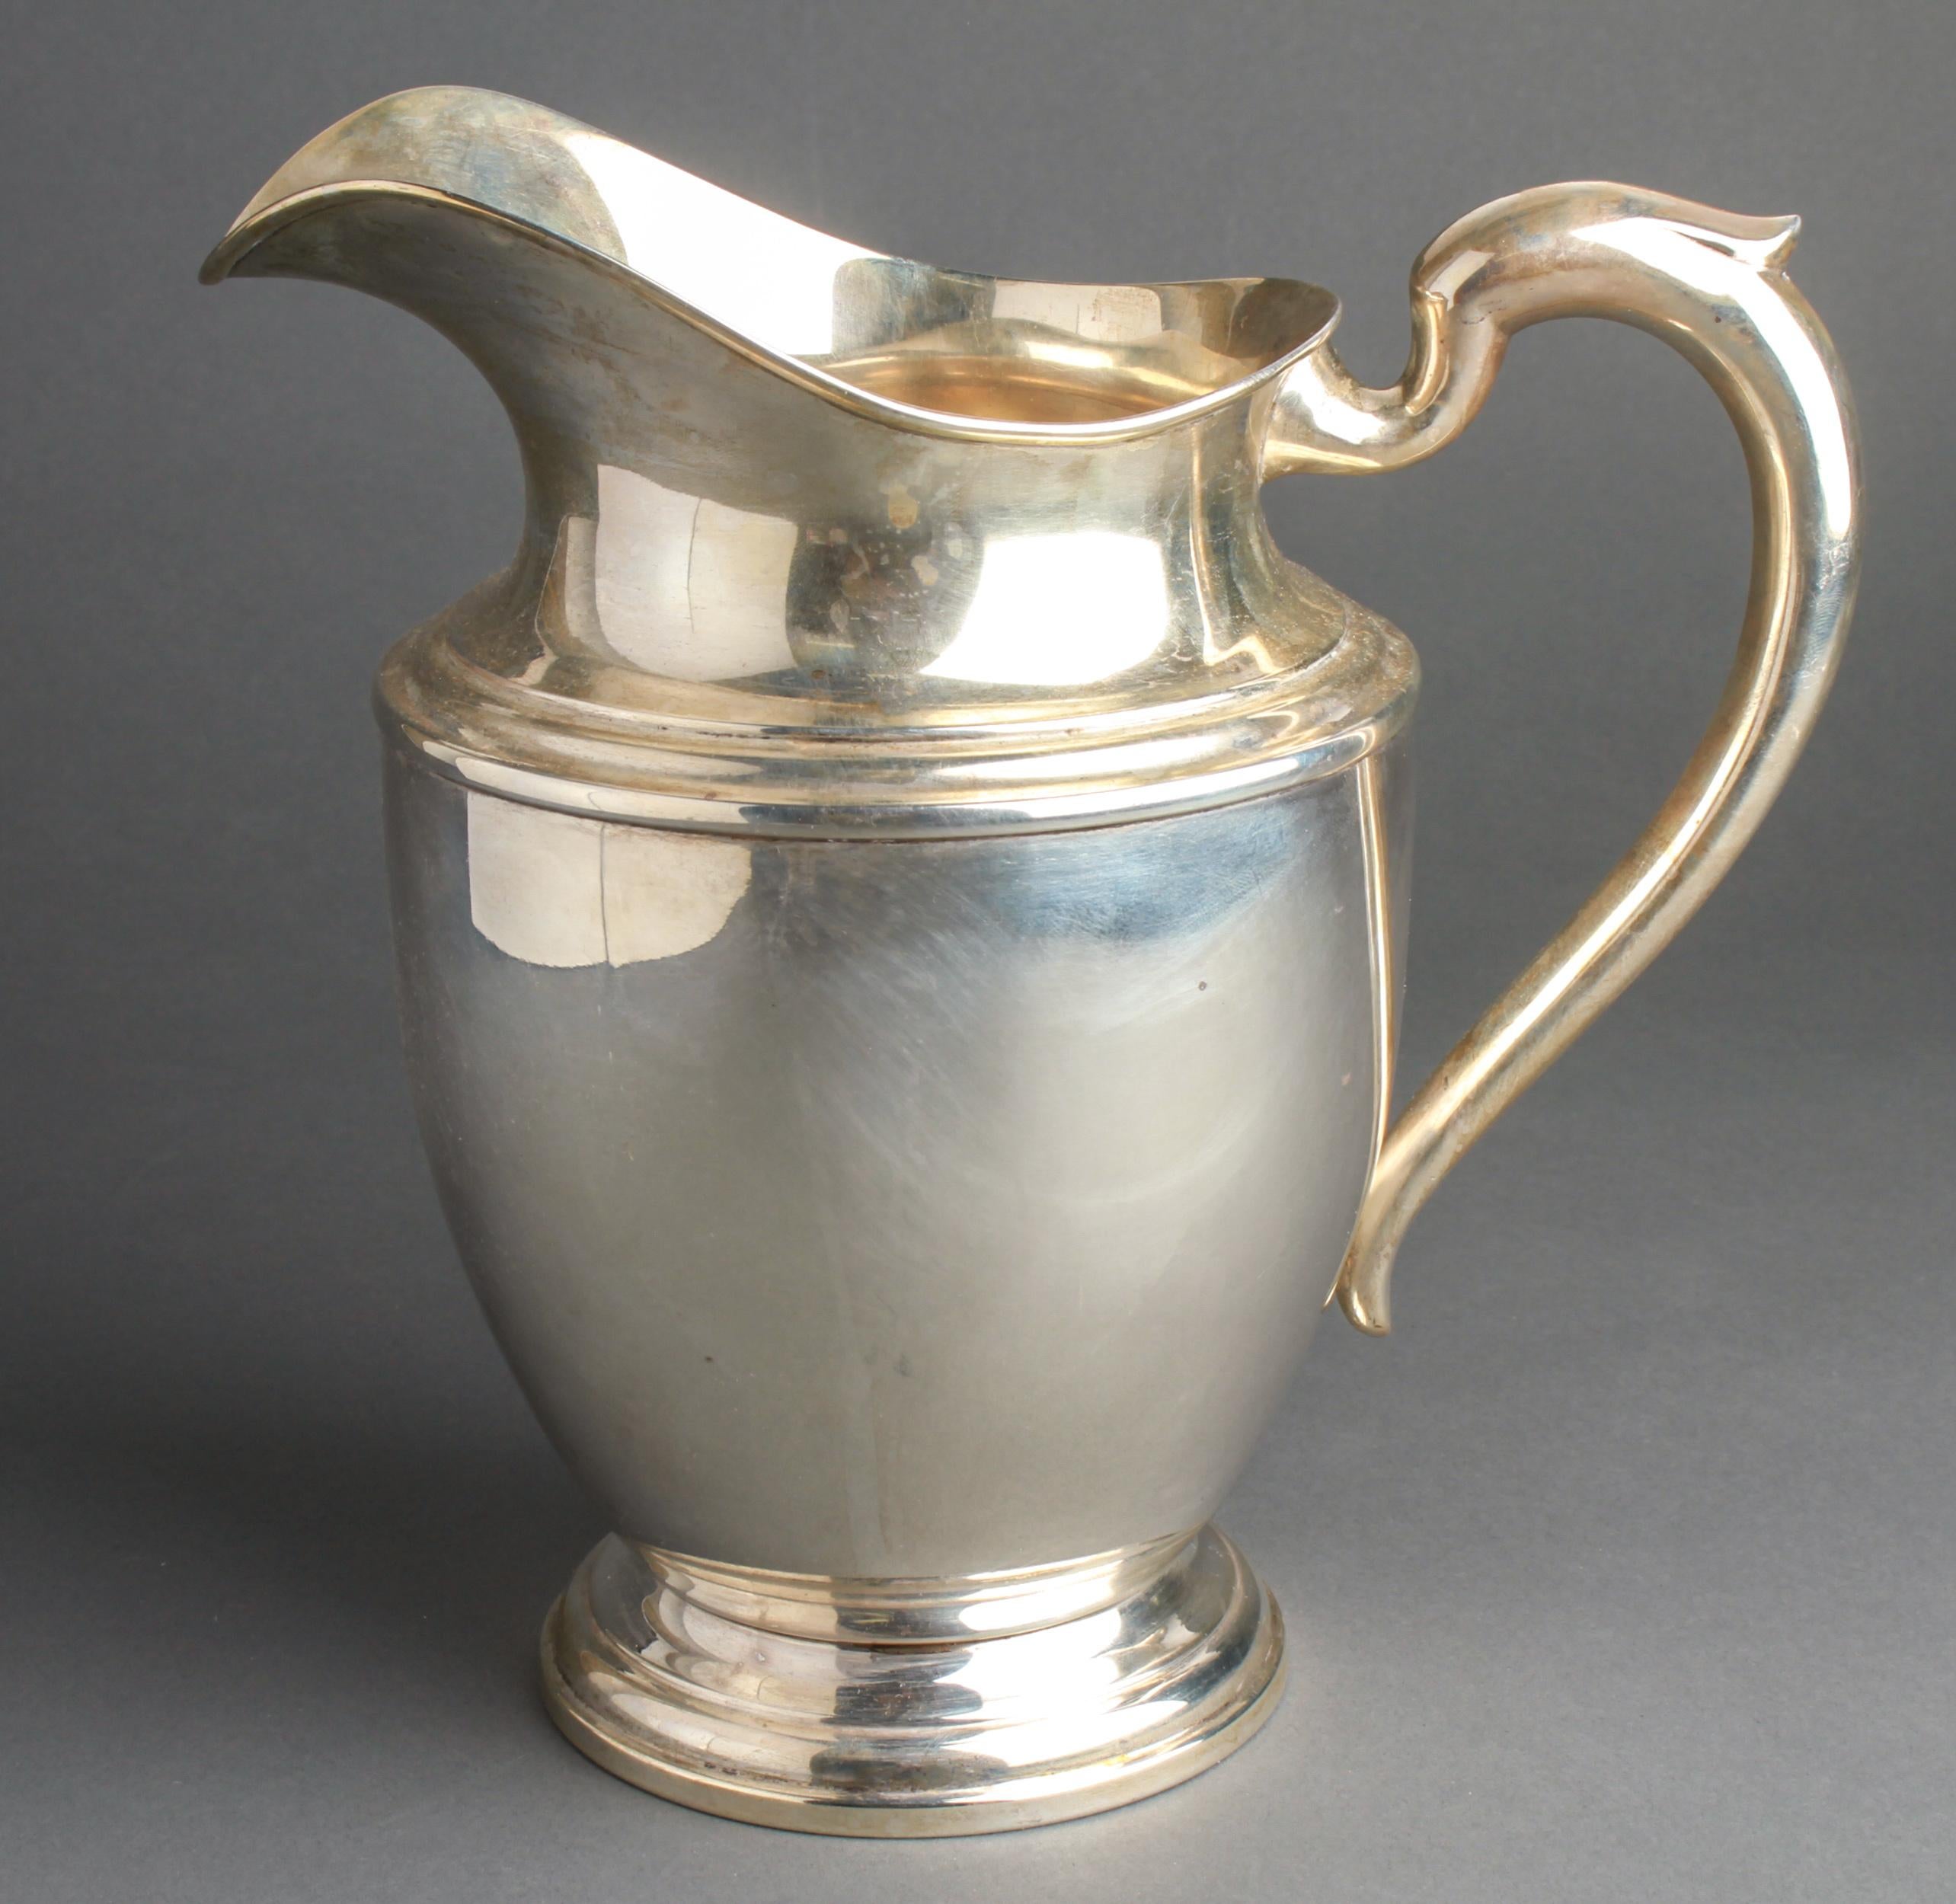 American sterling silver water pitcher by Michael C. Fina Co. Inc. from New York, NY, founded in 1935. The piece is in great vintage condition with age-appropriate wear and has a maker's mark and is marked 